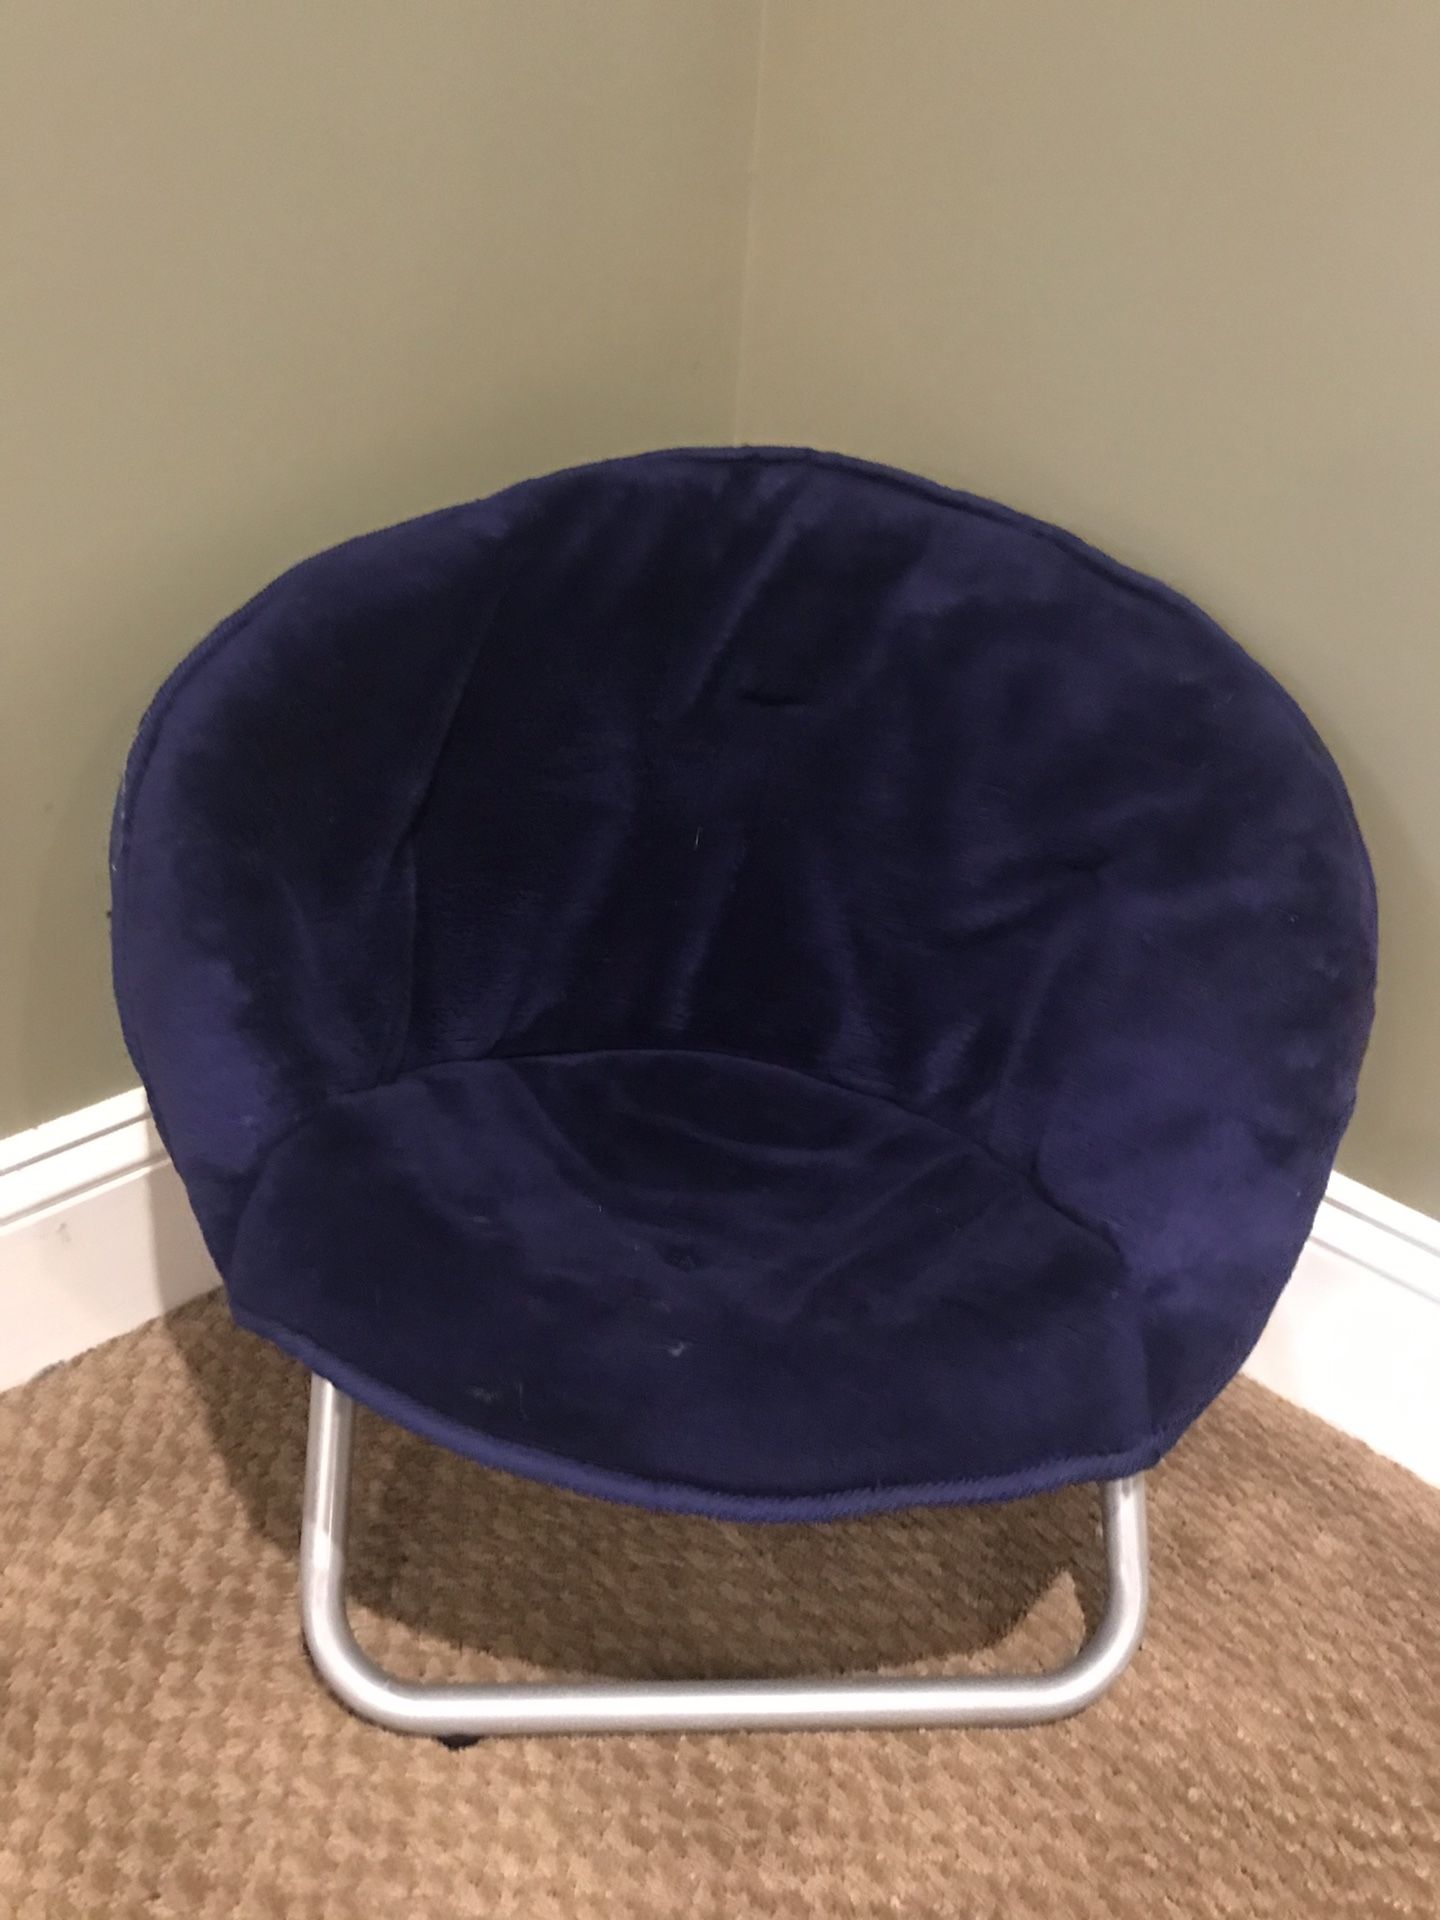 Kids’ Size Saucer Chair. Foldable